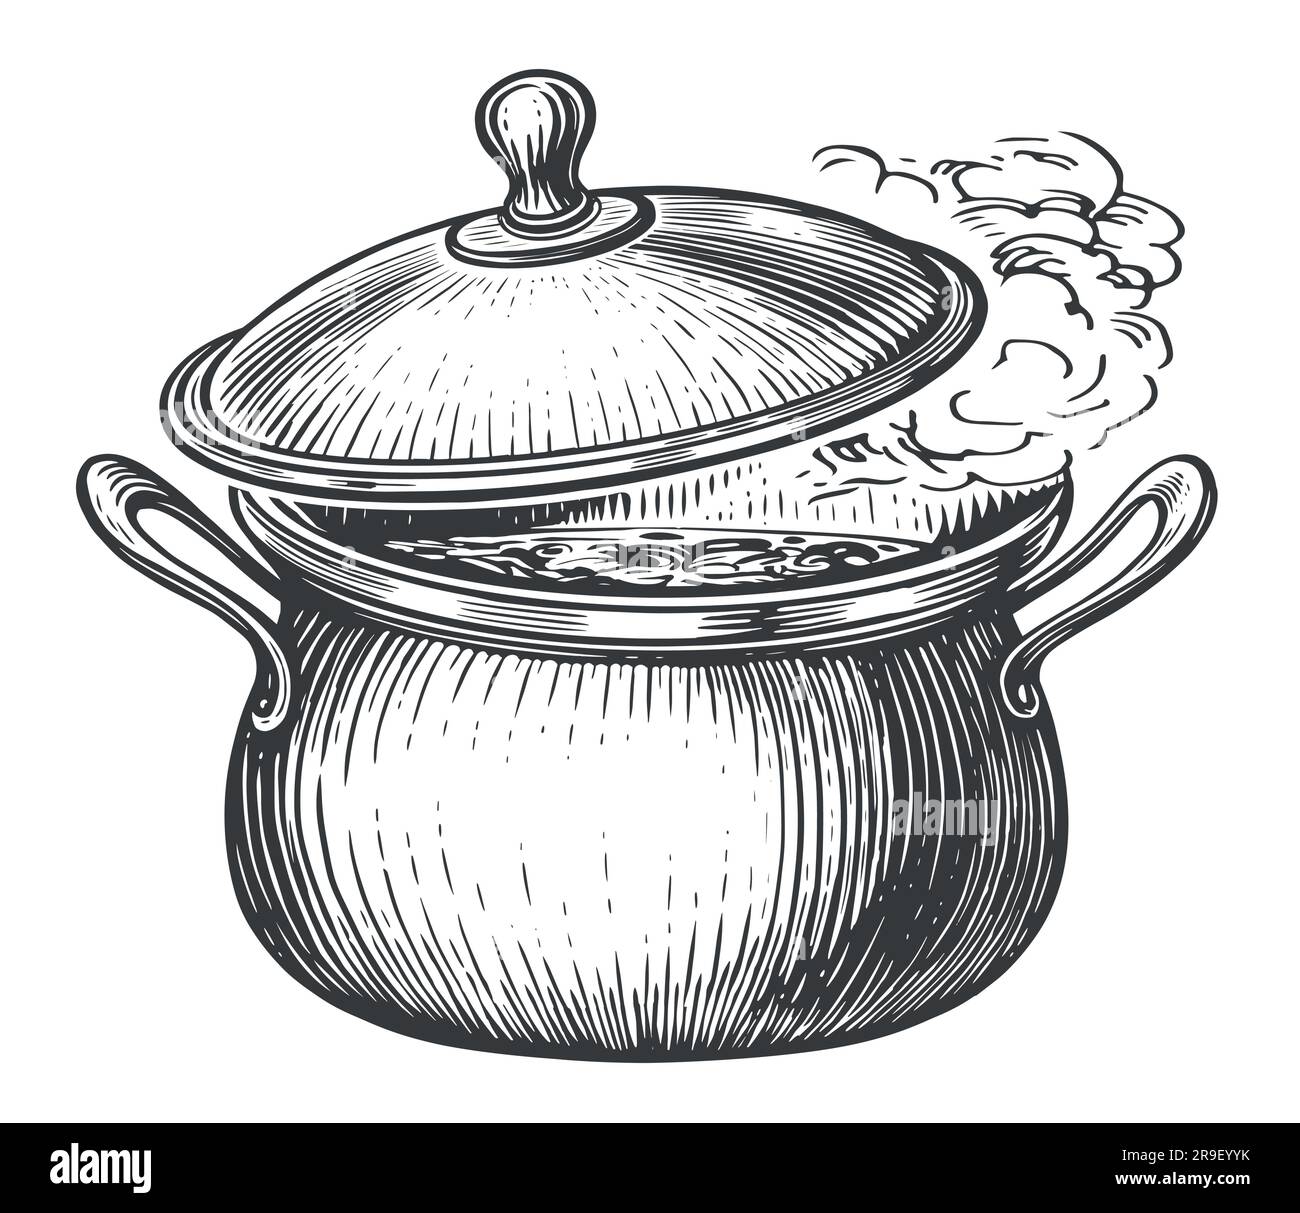 https://c8.alamy.com/comp/2R9EYYK/kitchen-pot-boiling-saucepan-cooking-pot-with-smoke-in-style-of-old-engraving-sketch-vector-illustration-2R9EYYK.jpg